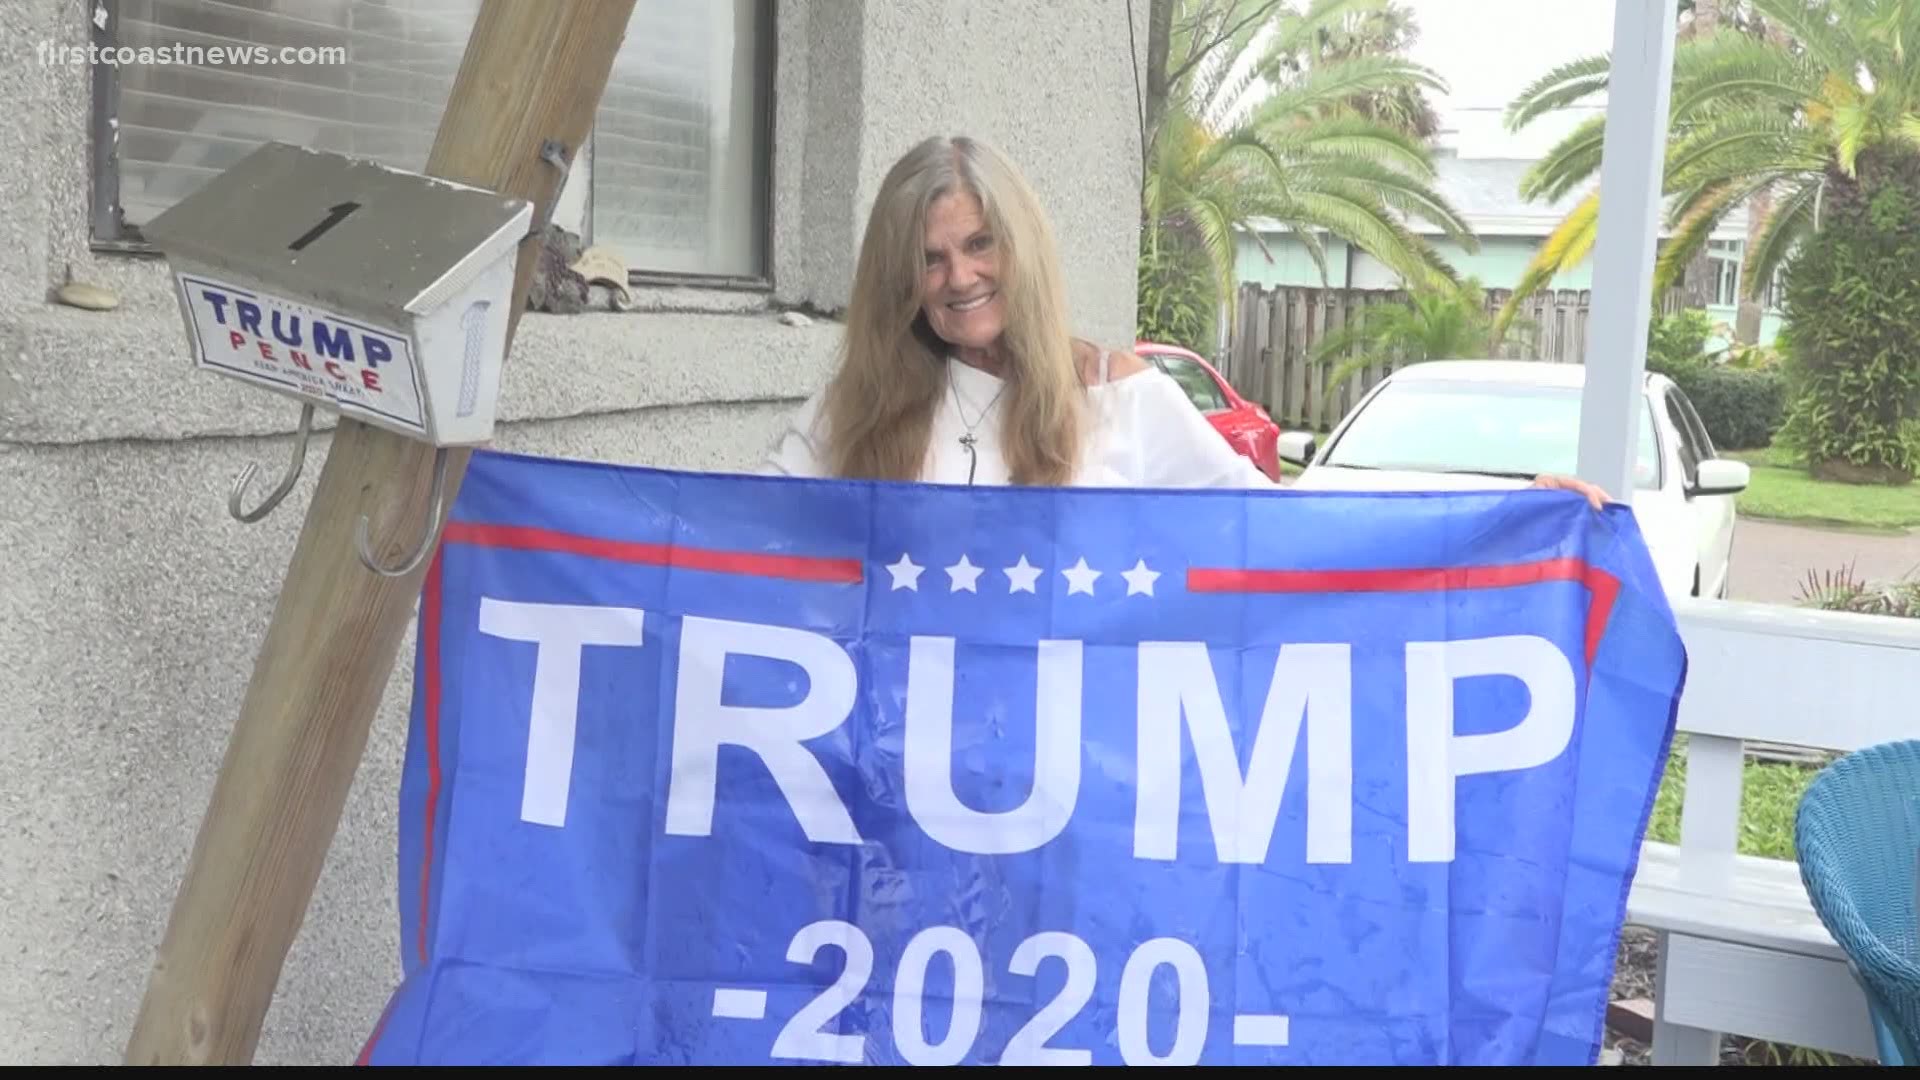 A Neptune Beach woman says her sign supporting President Trump was stolen, along with similar signs belonging to her neighbors.